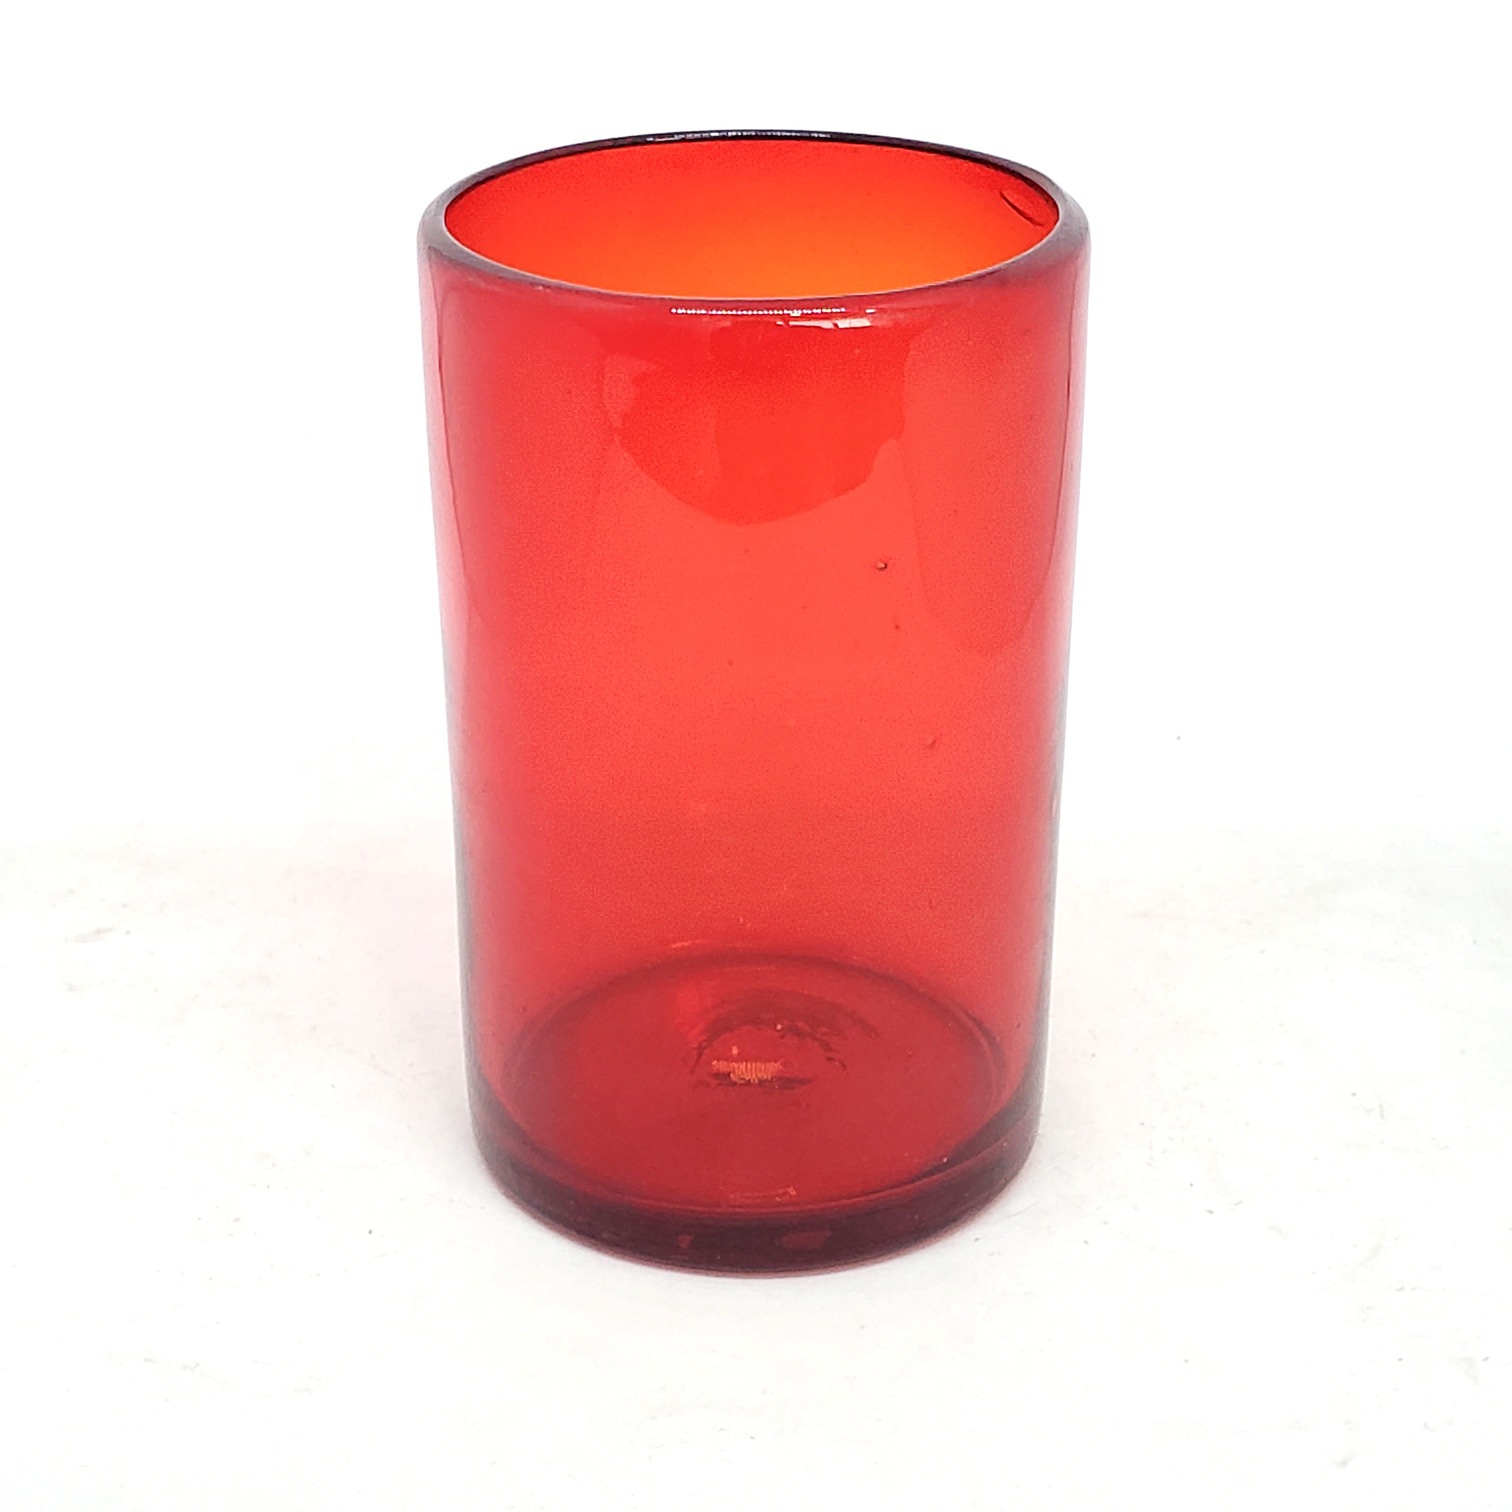 New Items / Solid Ruby Red 14 oz Drinking Glasses (set of 6) / These handcrafted glasses deliver a classic touch to your favorite drink.